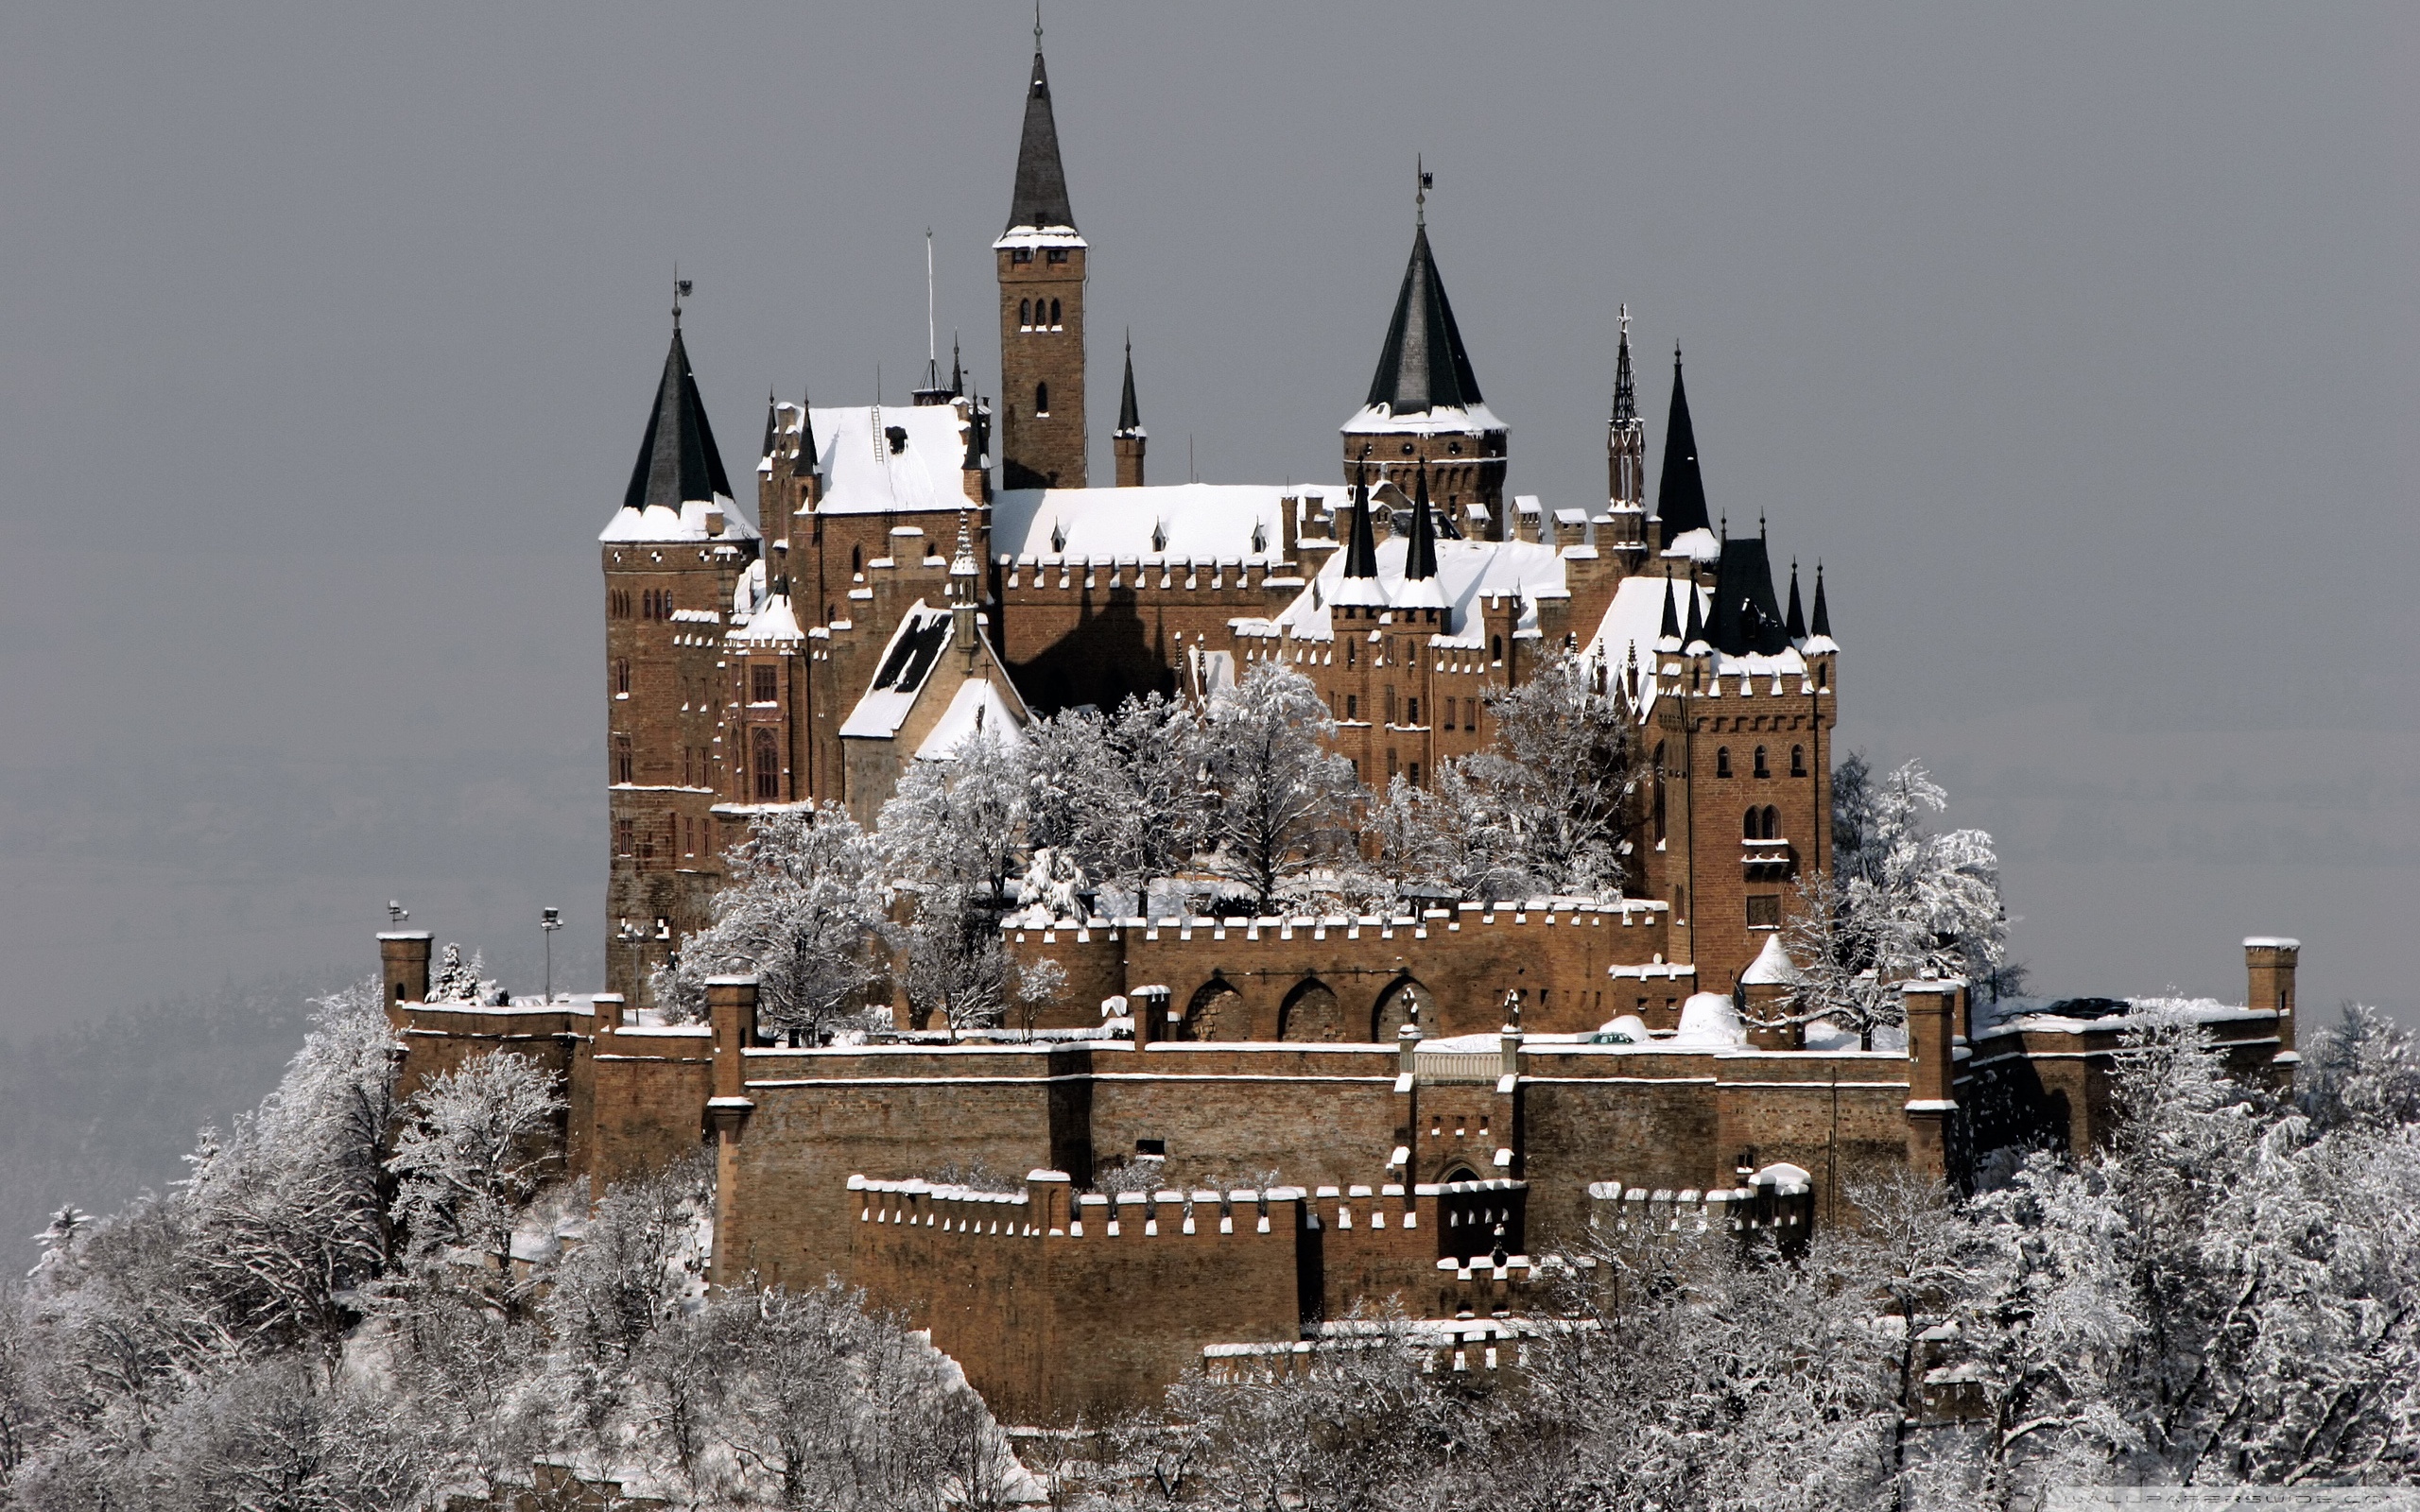 Castle Hohenzollern View Wallpapers